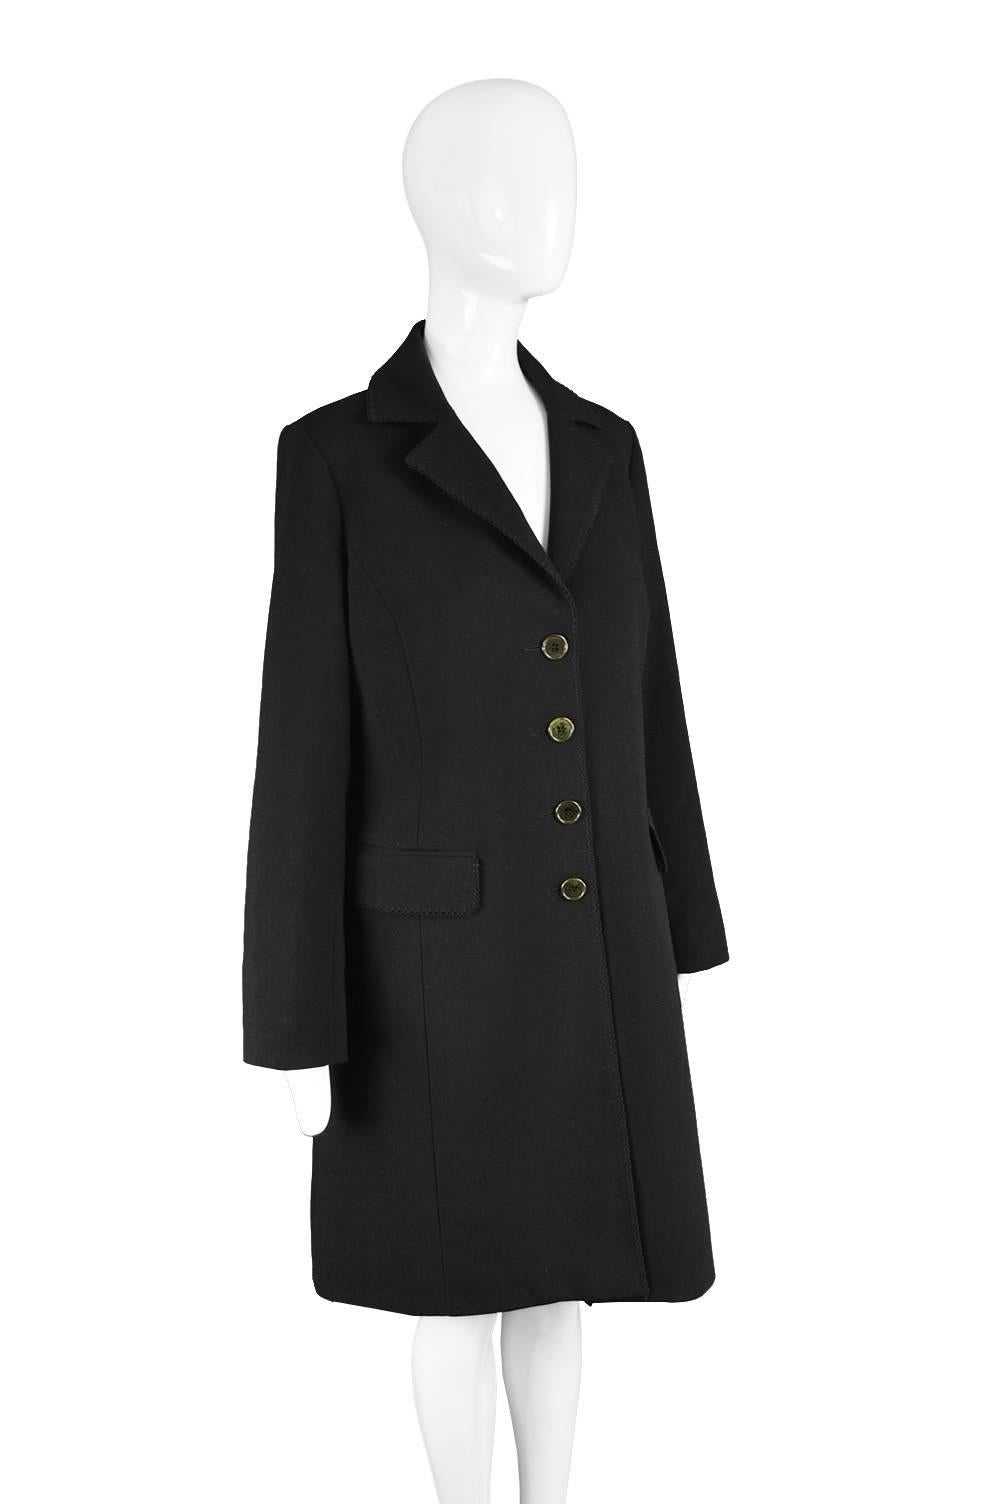 Romeo Gigli Vintage Women's Black Embroidered Trim Single Breasted Coat, 1990s In Excellent Condition For Sale In Doncaster, South Yorkshire